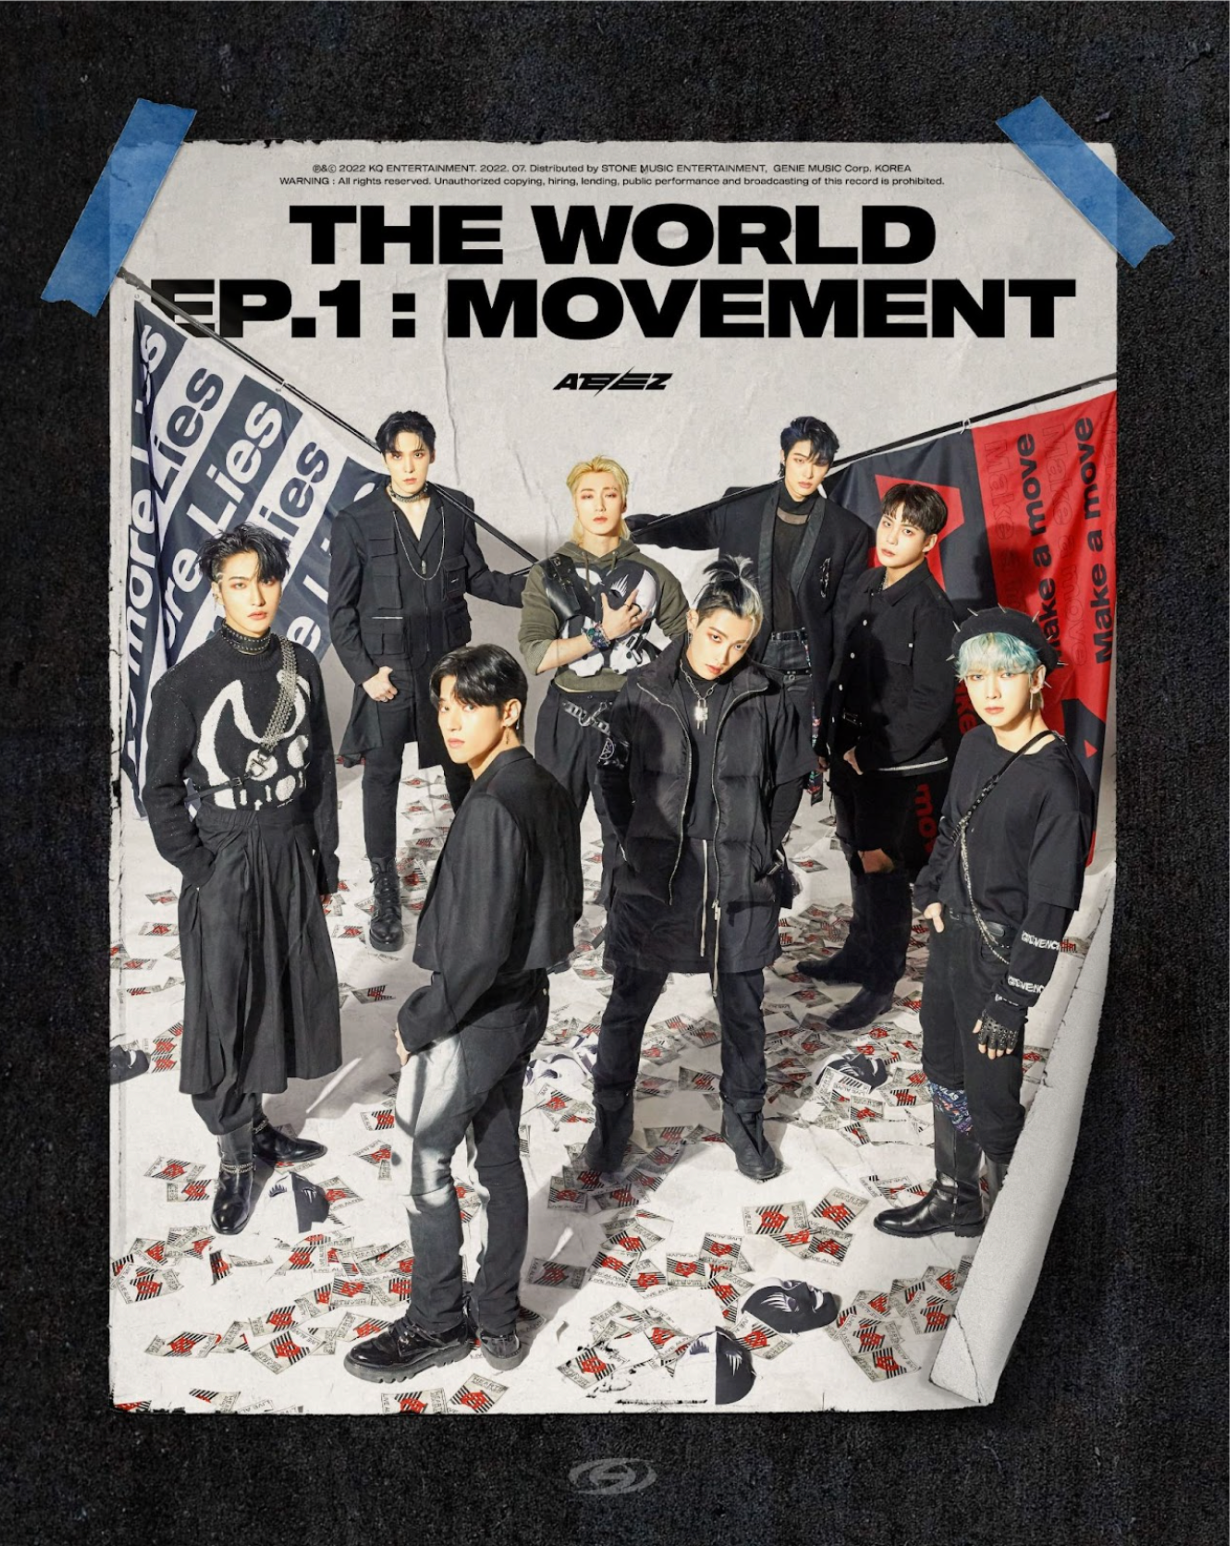 ateez the world ep.1: movement group image teaser: twitter